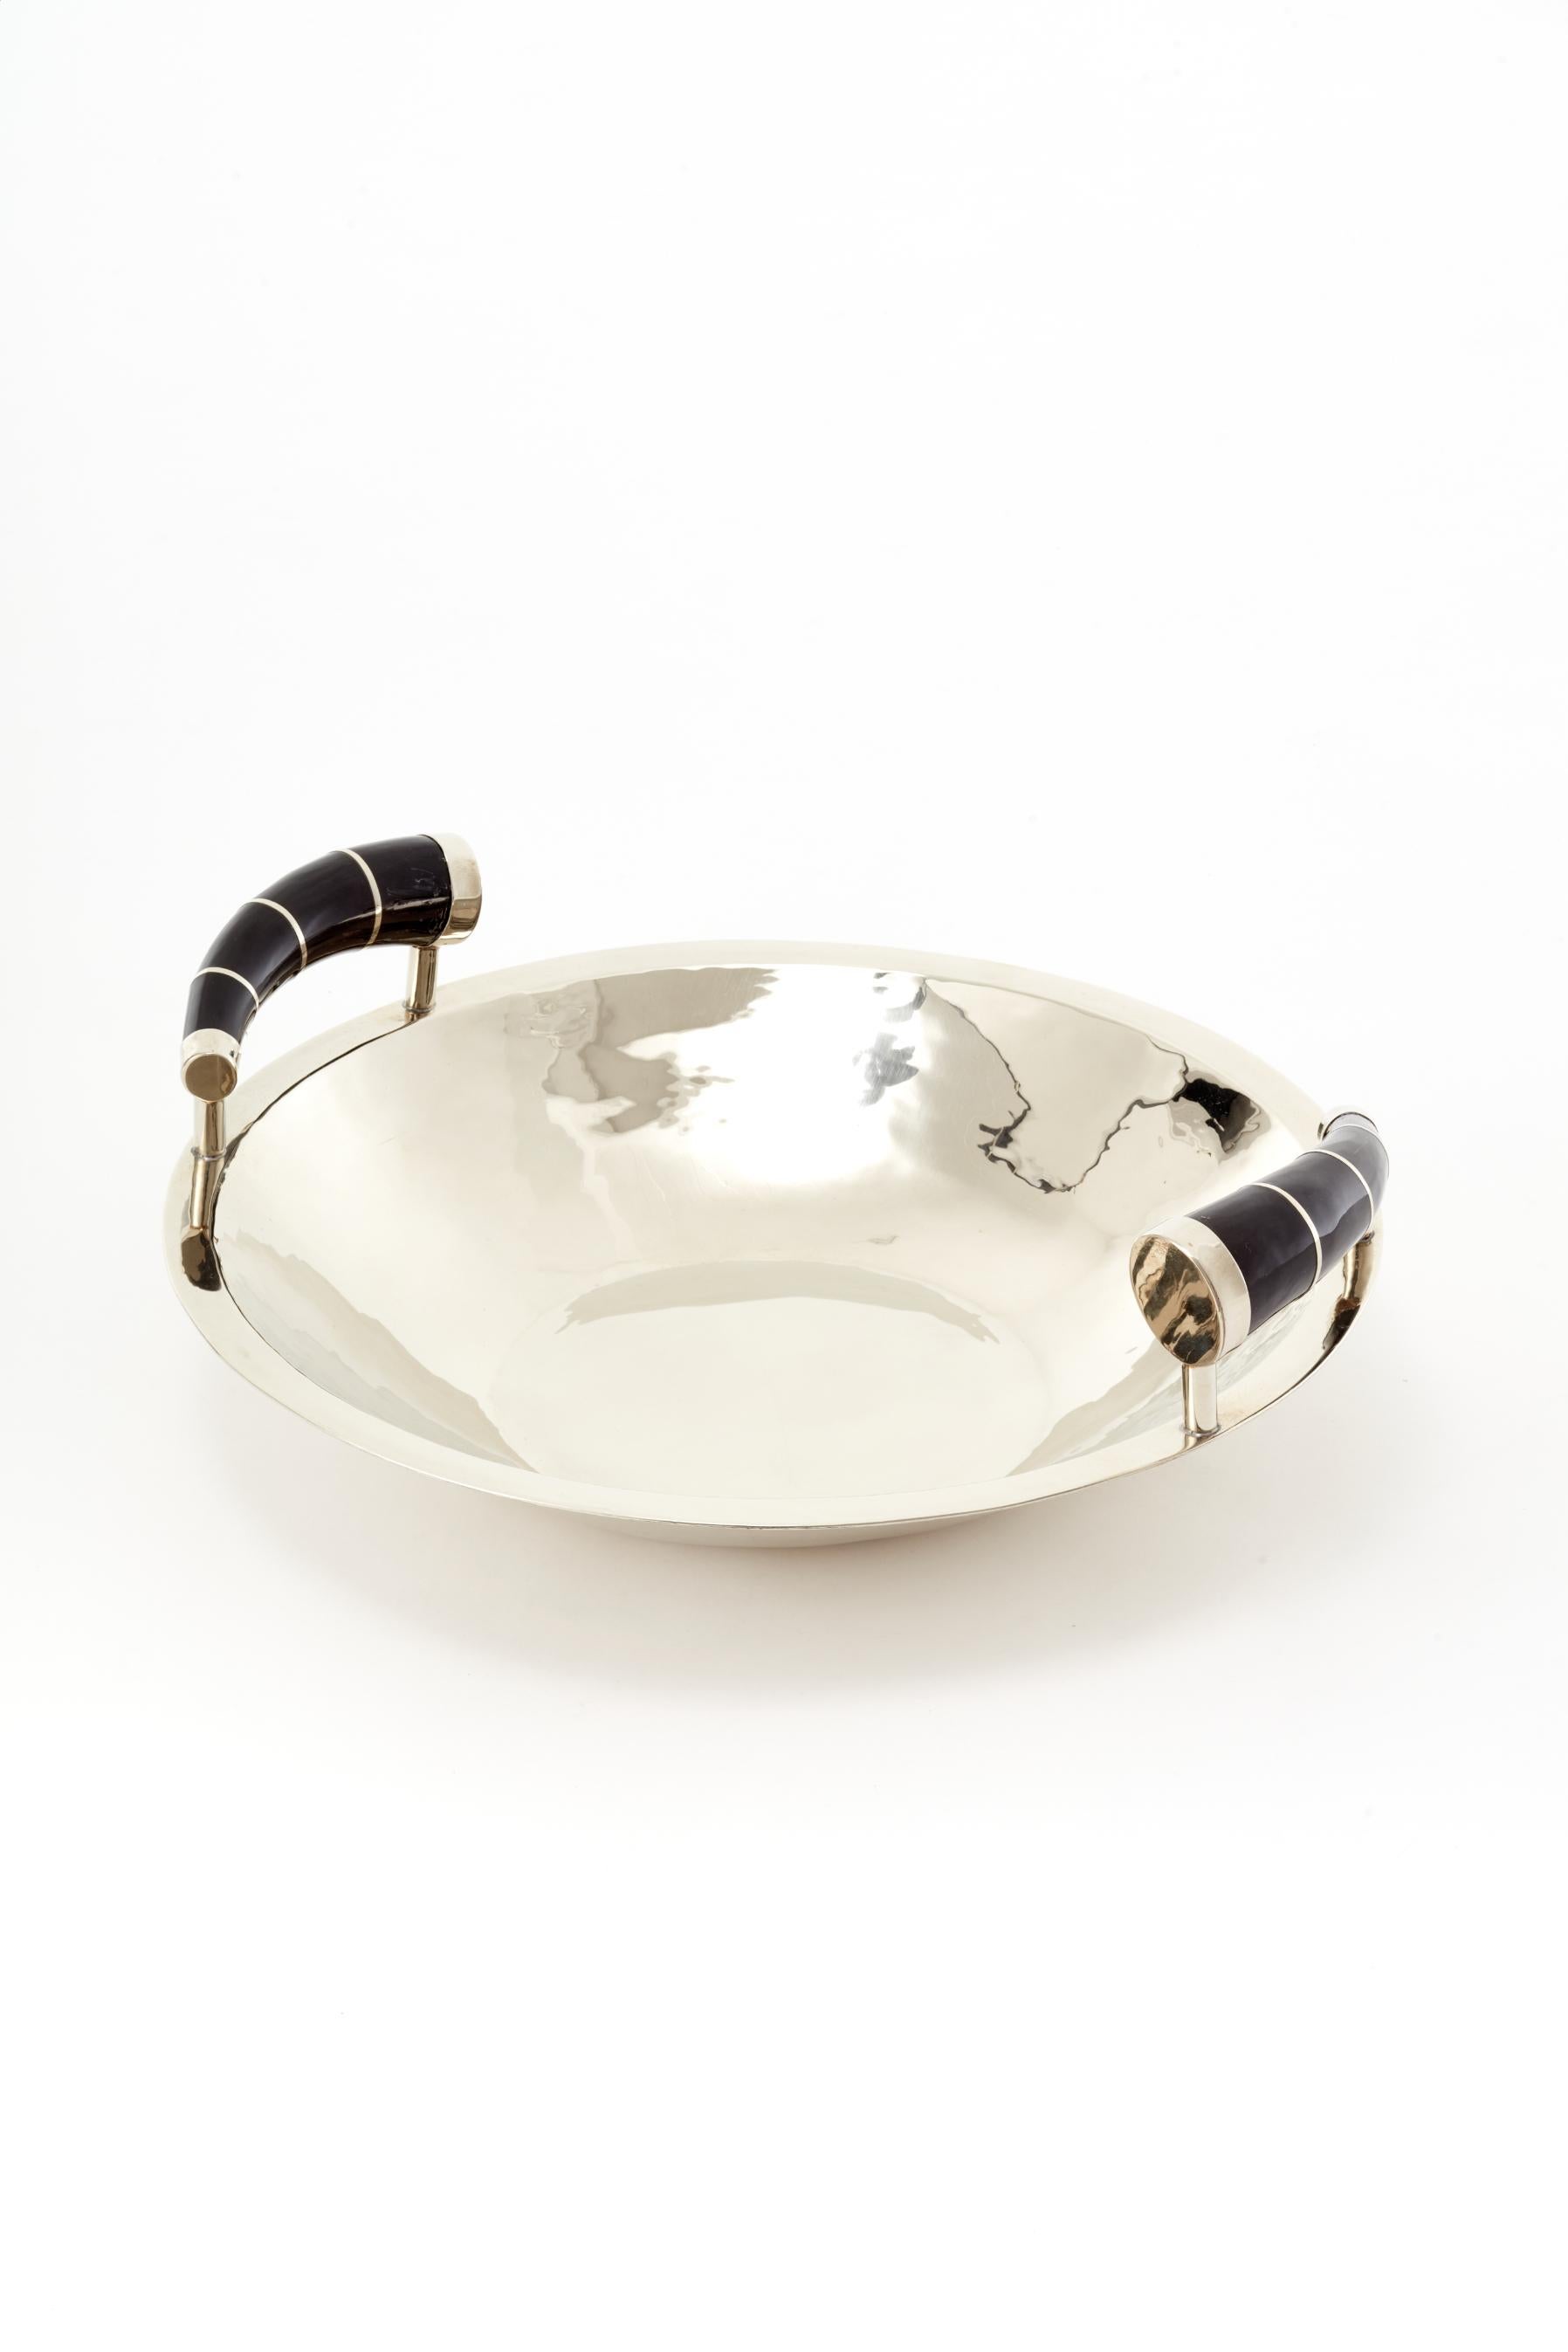 Contemporary Chubut Large Bowl, Alpaca Silver & Black Horn For Sale